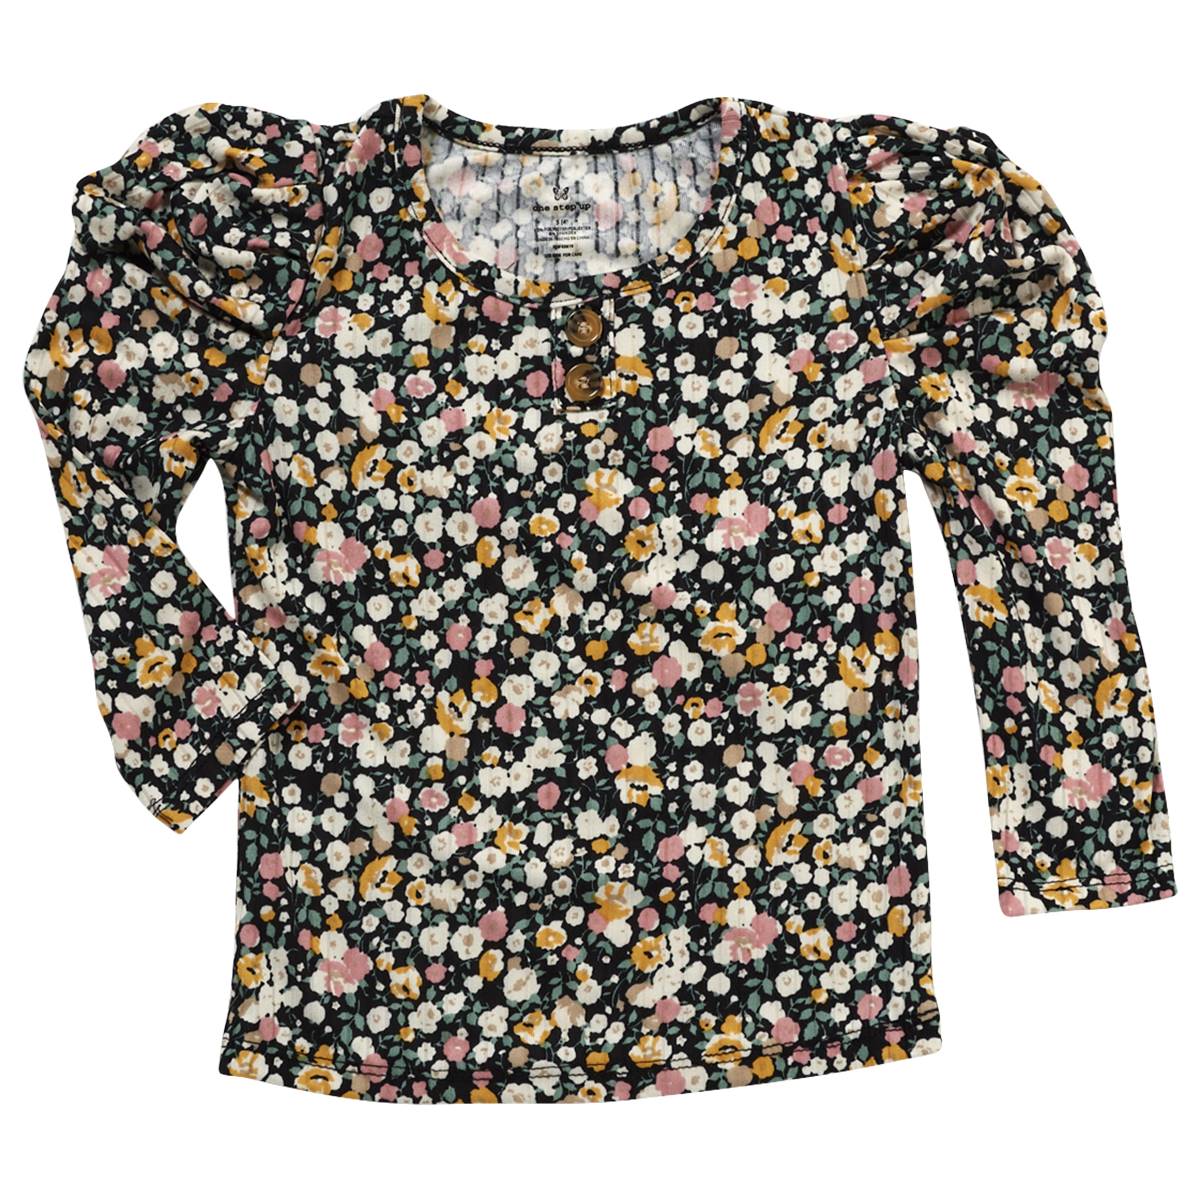 Girls (4-6x) One Step Up Ditsy Floral Rib Top